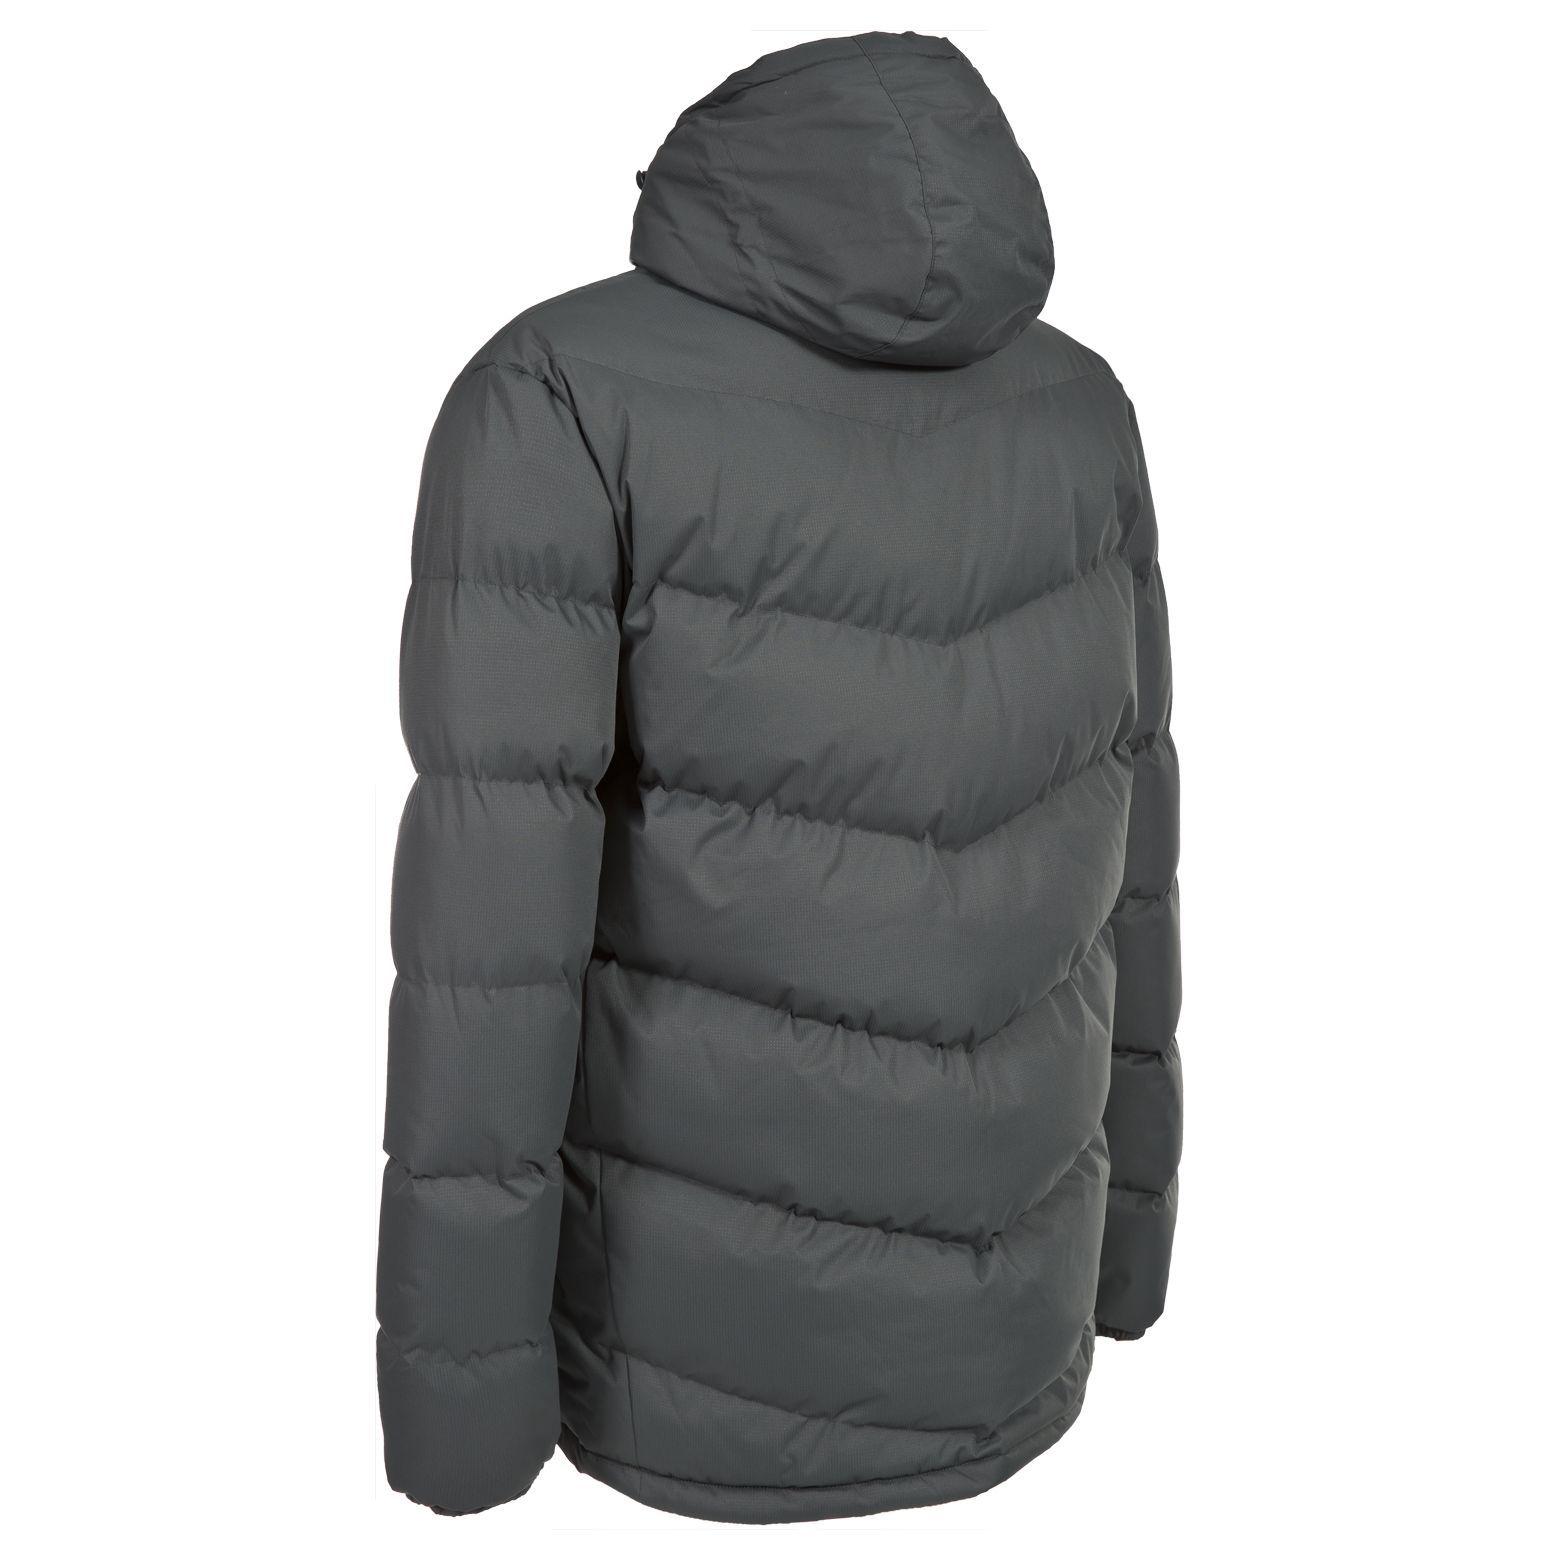 Padded jacket. Adjustable zip off hood. 3 zip pockets. Low profile zips. Drawcord at hem. Elasticated cuff. Shell: 100% Polyester, Lining: 100% Polyester, Padding: 100% Polyester.